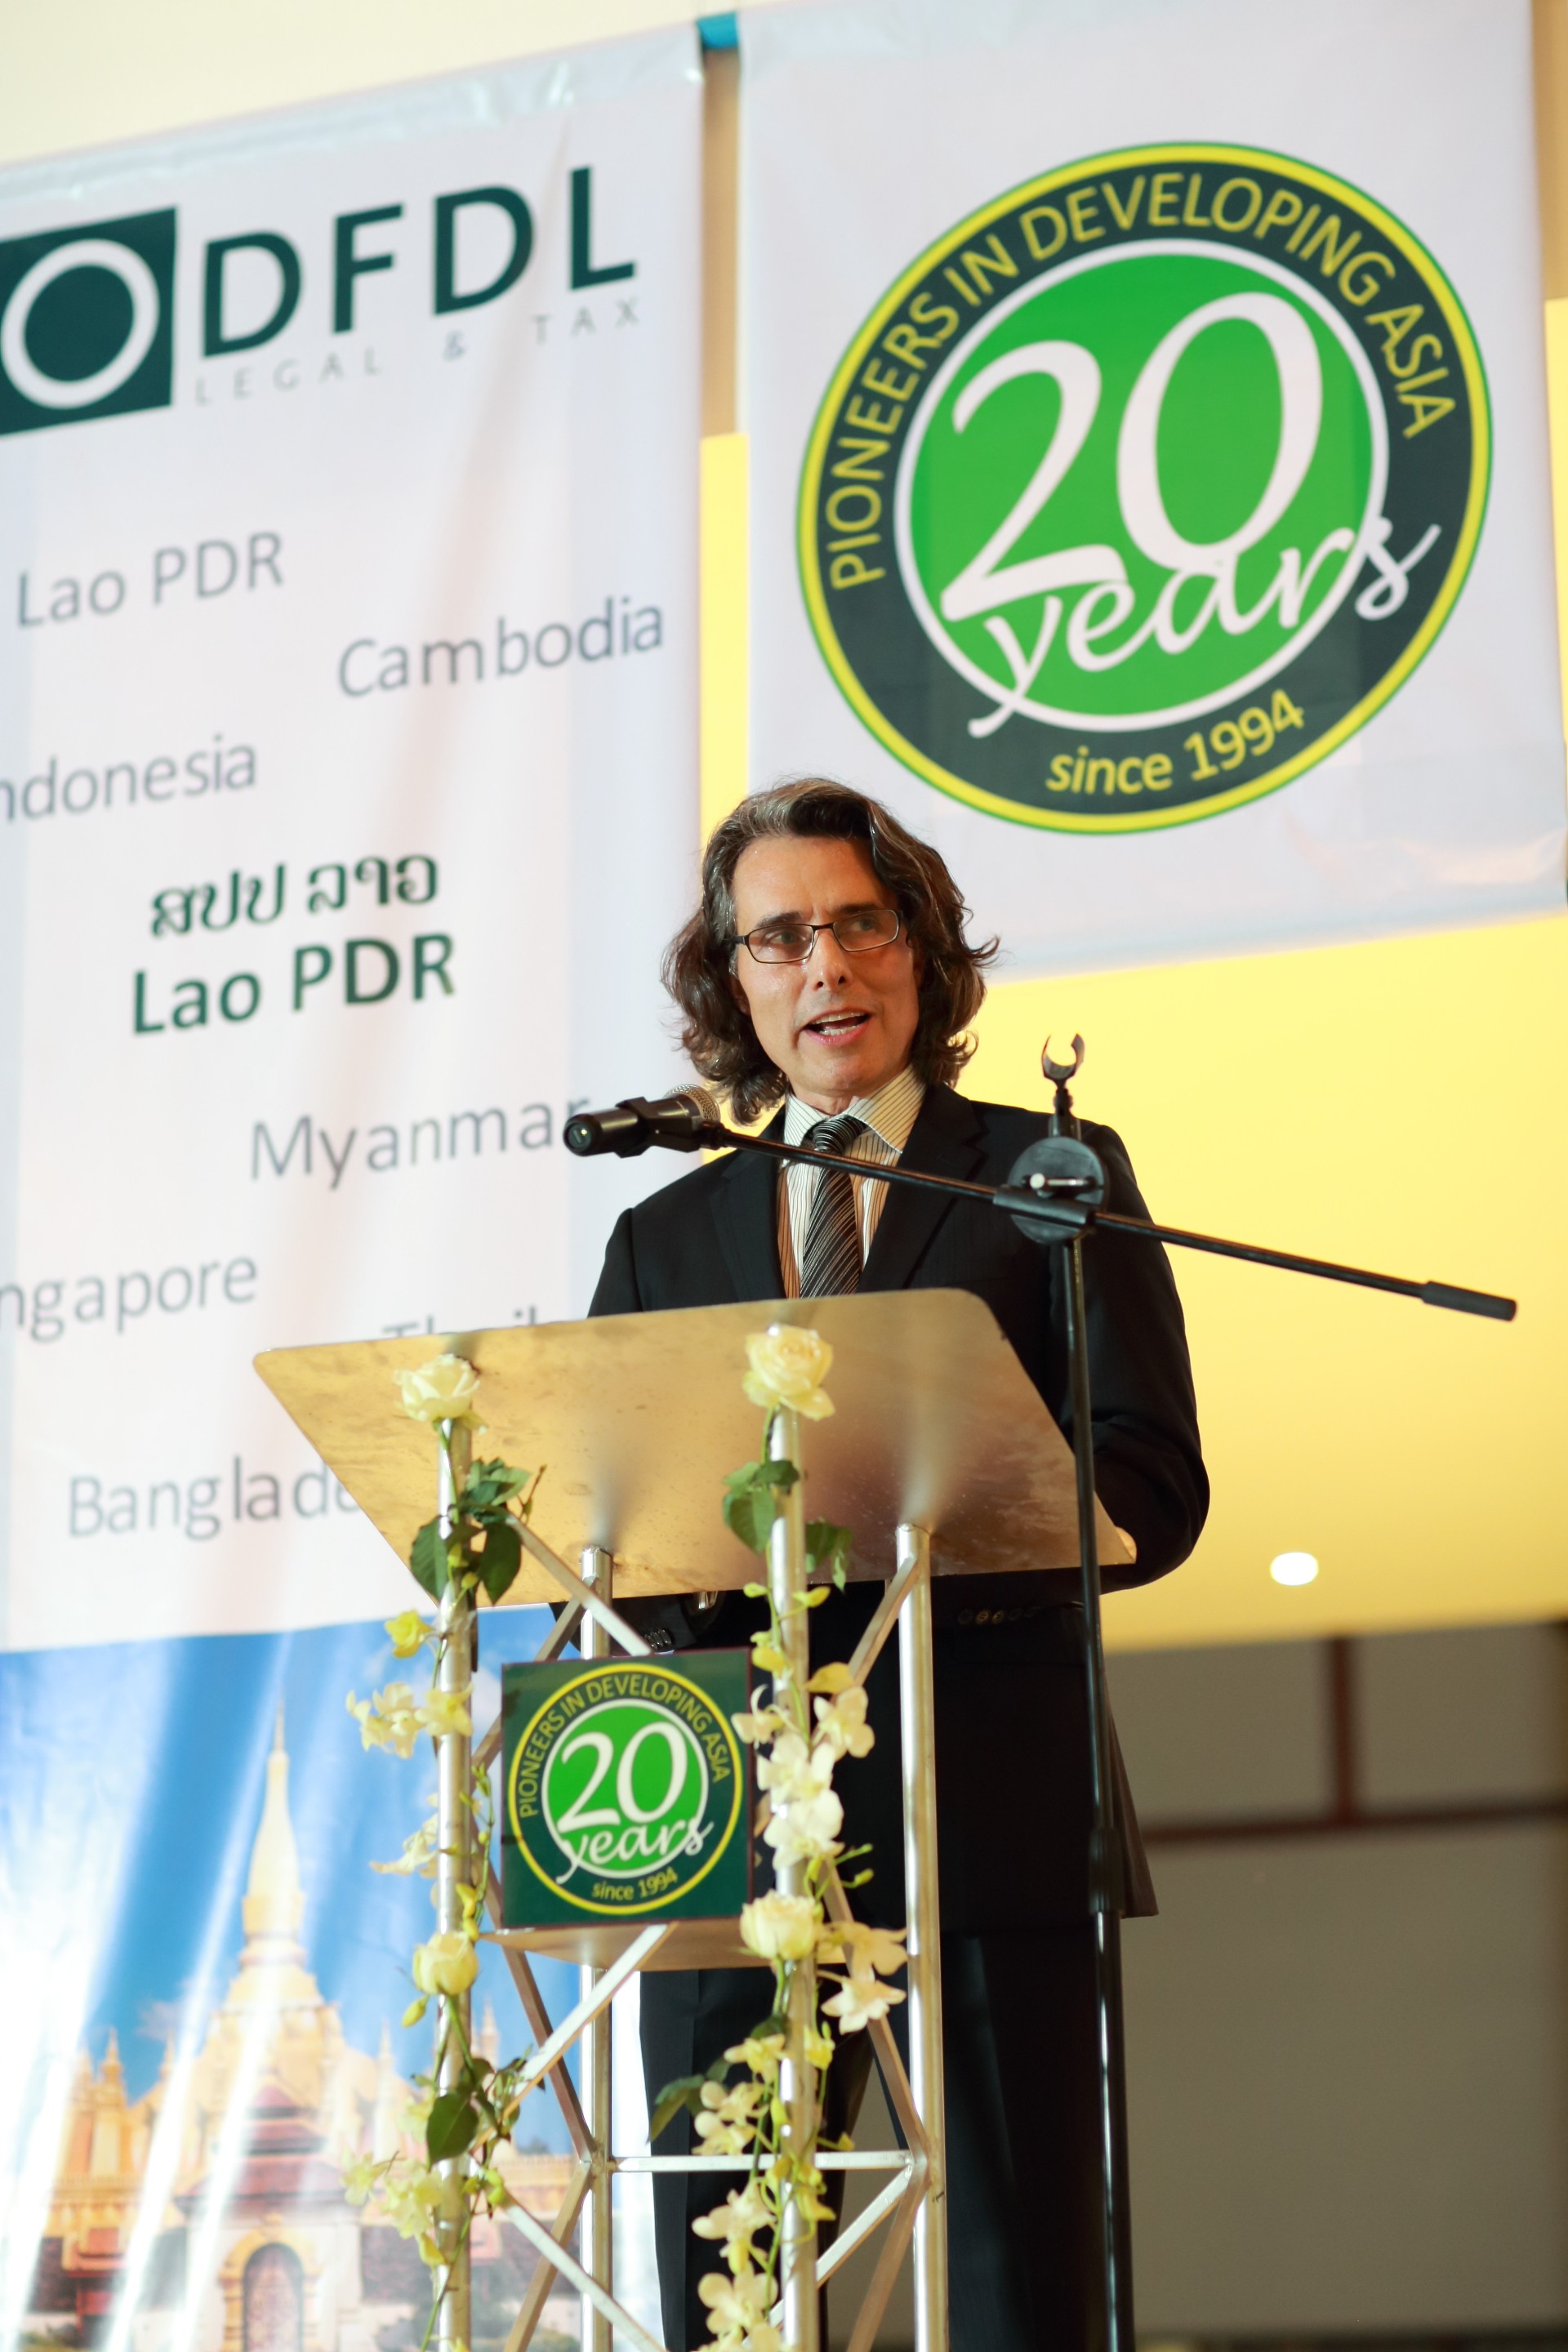 20th_Anniversary_Event_for_clients_partners_and_GOL_officials_in_Lao_on_30_Sept_2014_1